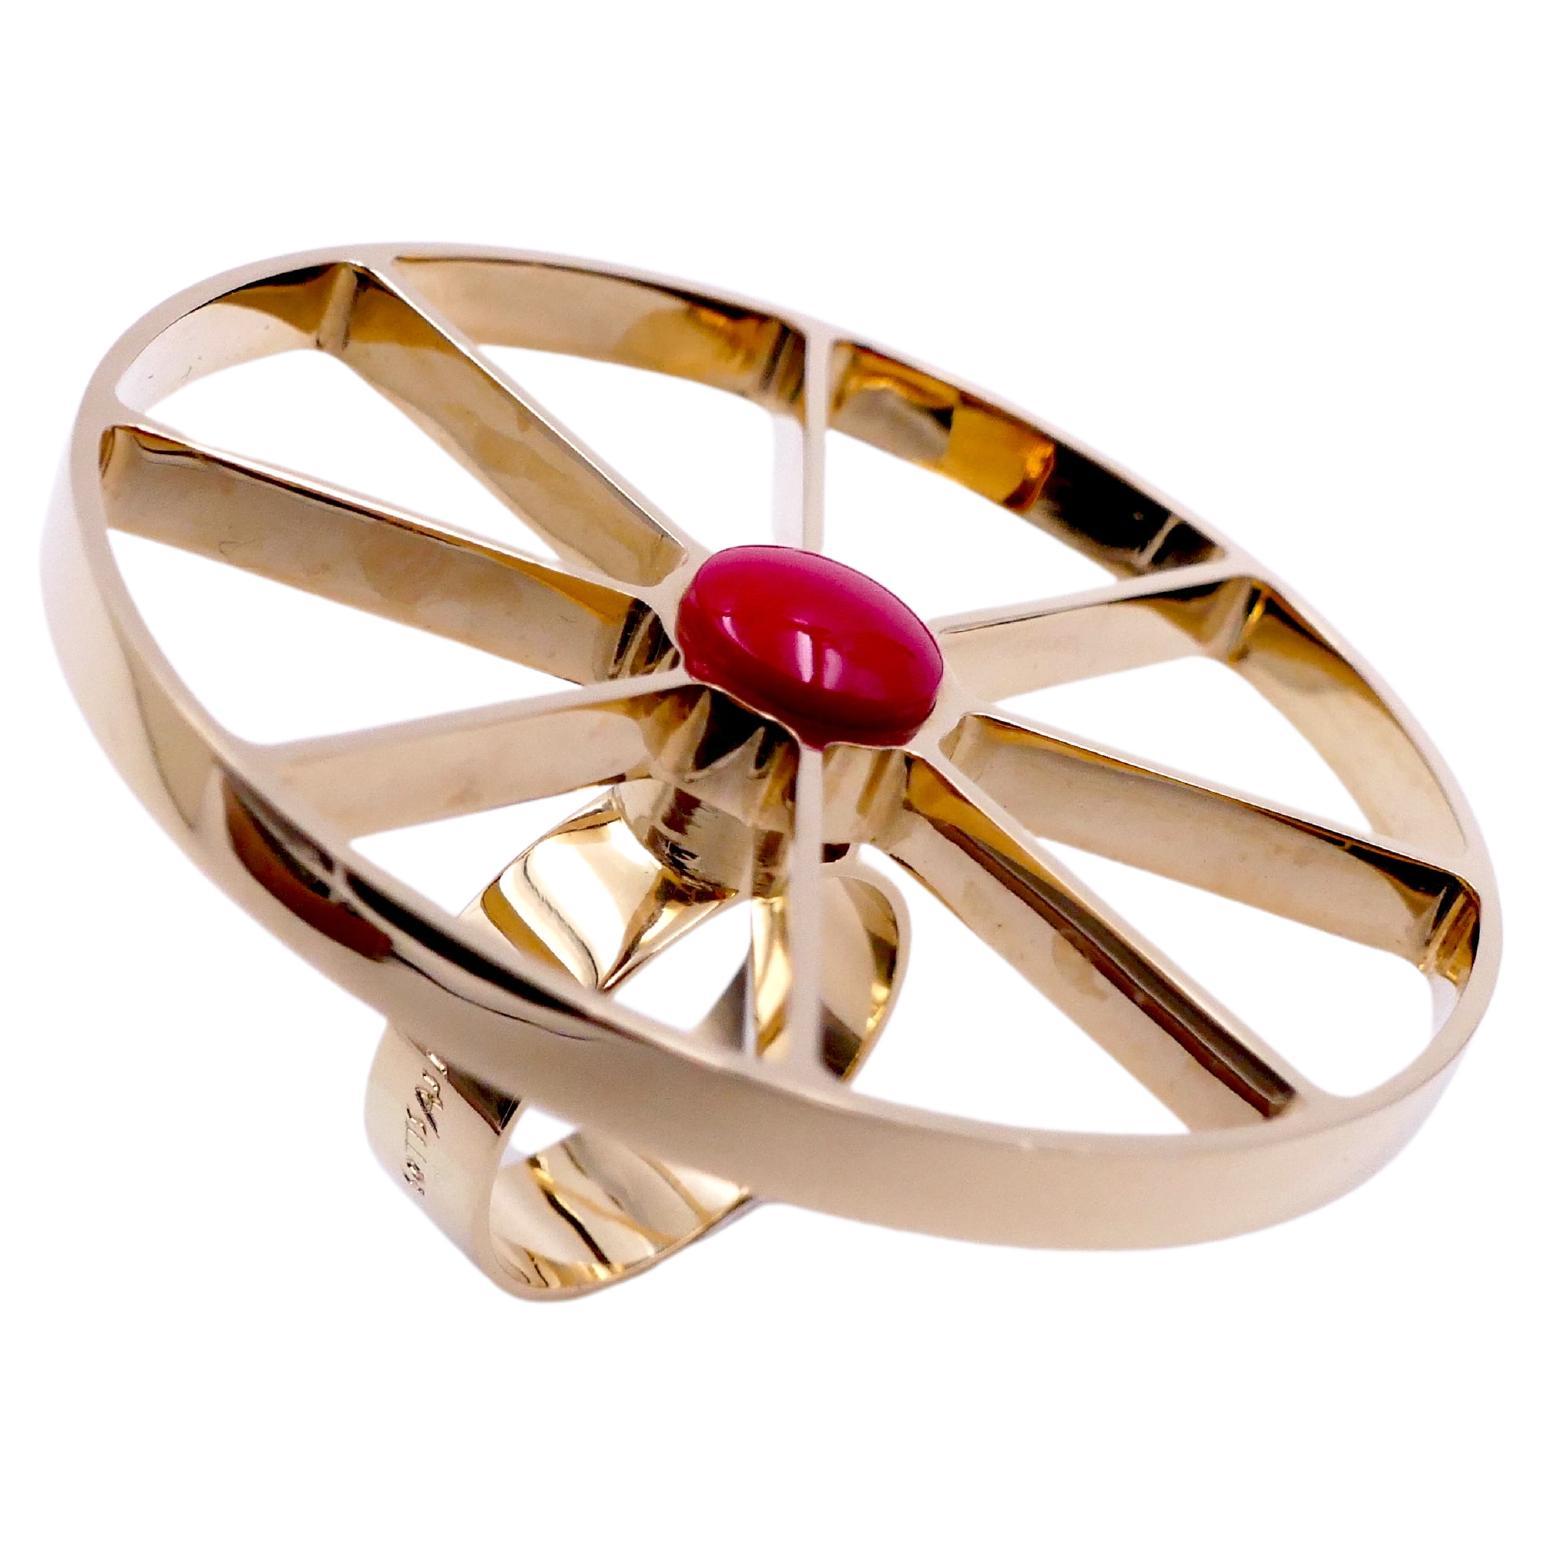 Ettore Sottsass "Ruota" 'Wheel' 18 Carat and Coral Ring, Limited Edition 1997